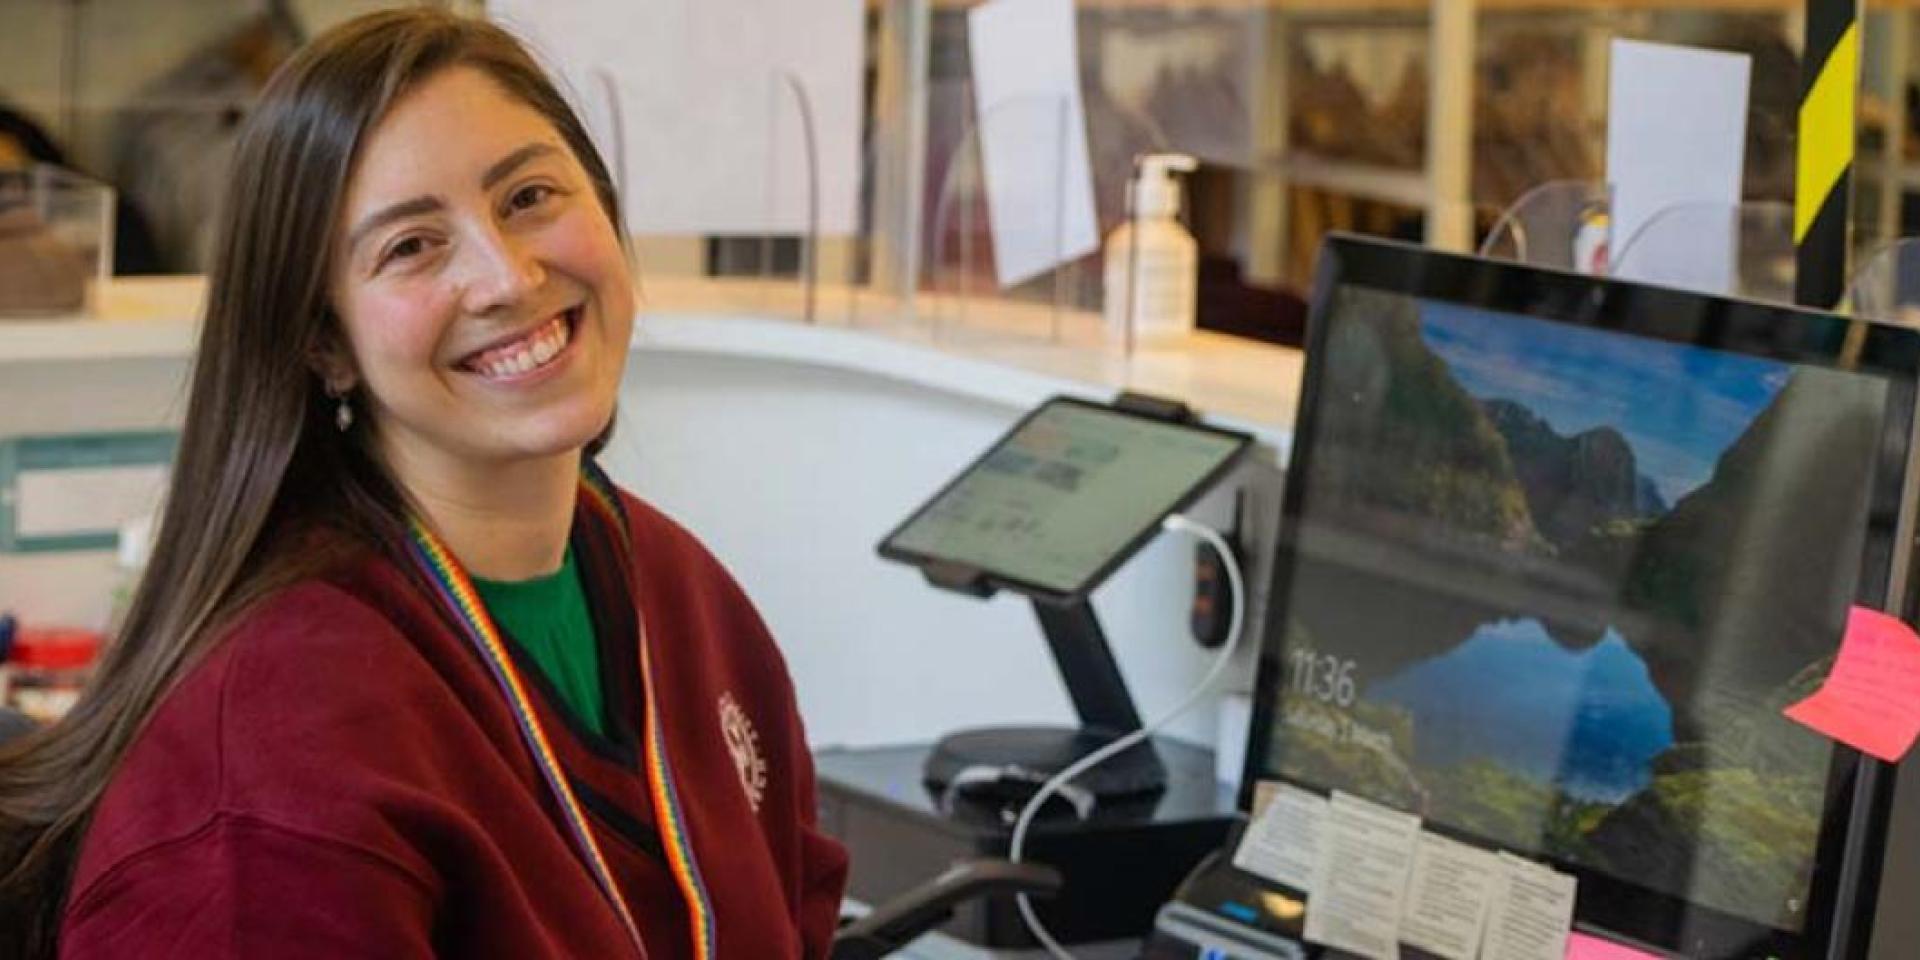 A staff member smiles to camera while working at a desk in The University Of Edinburgh Visitor Centre